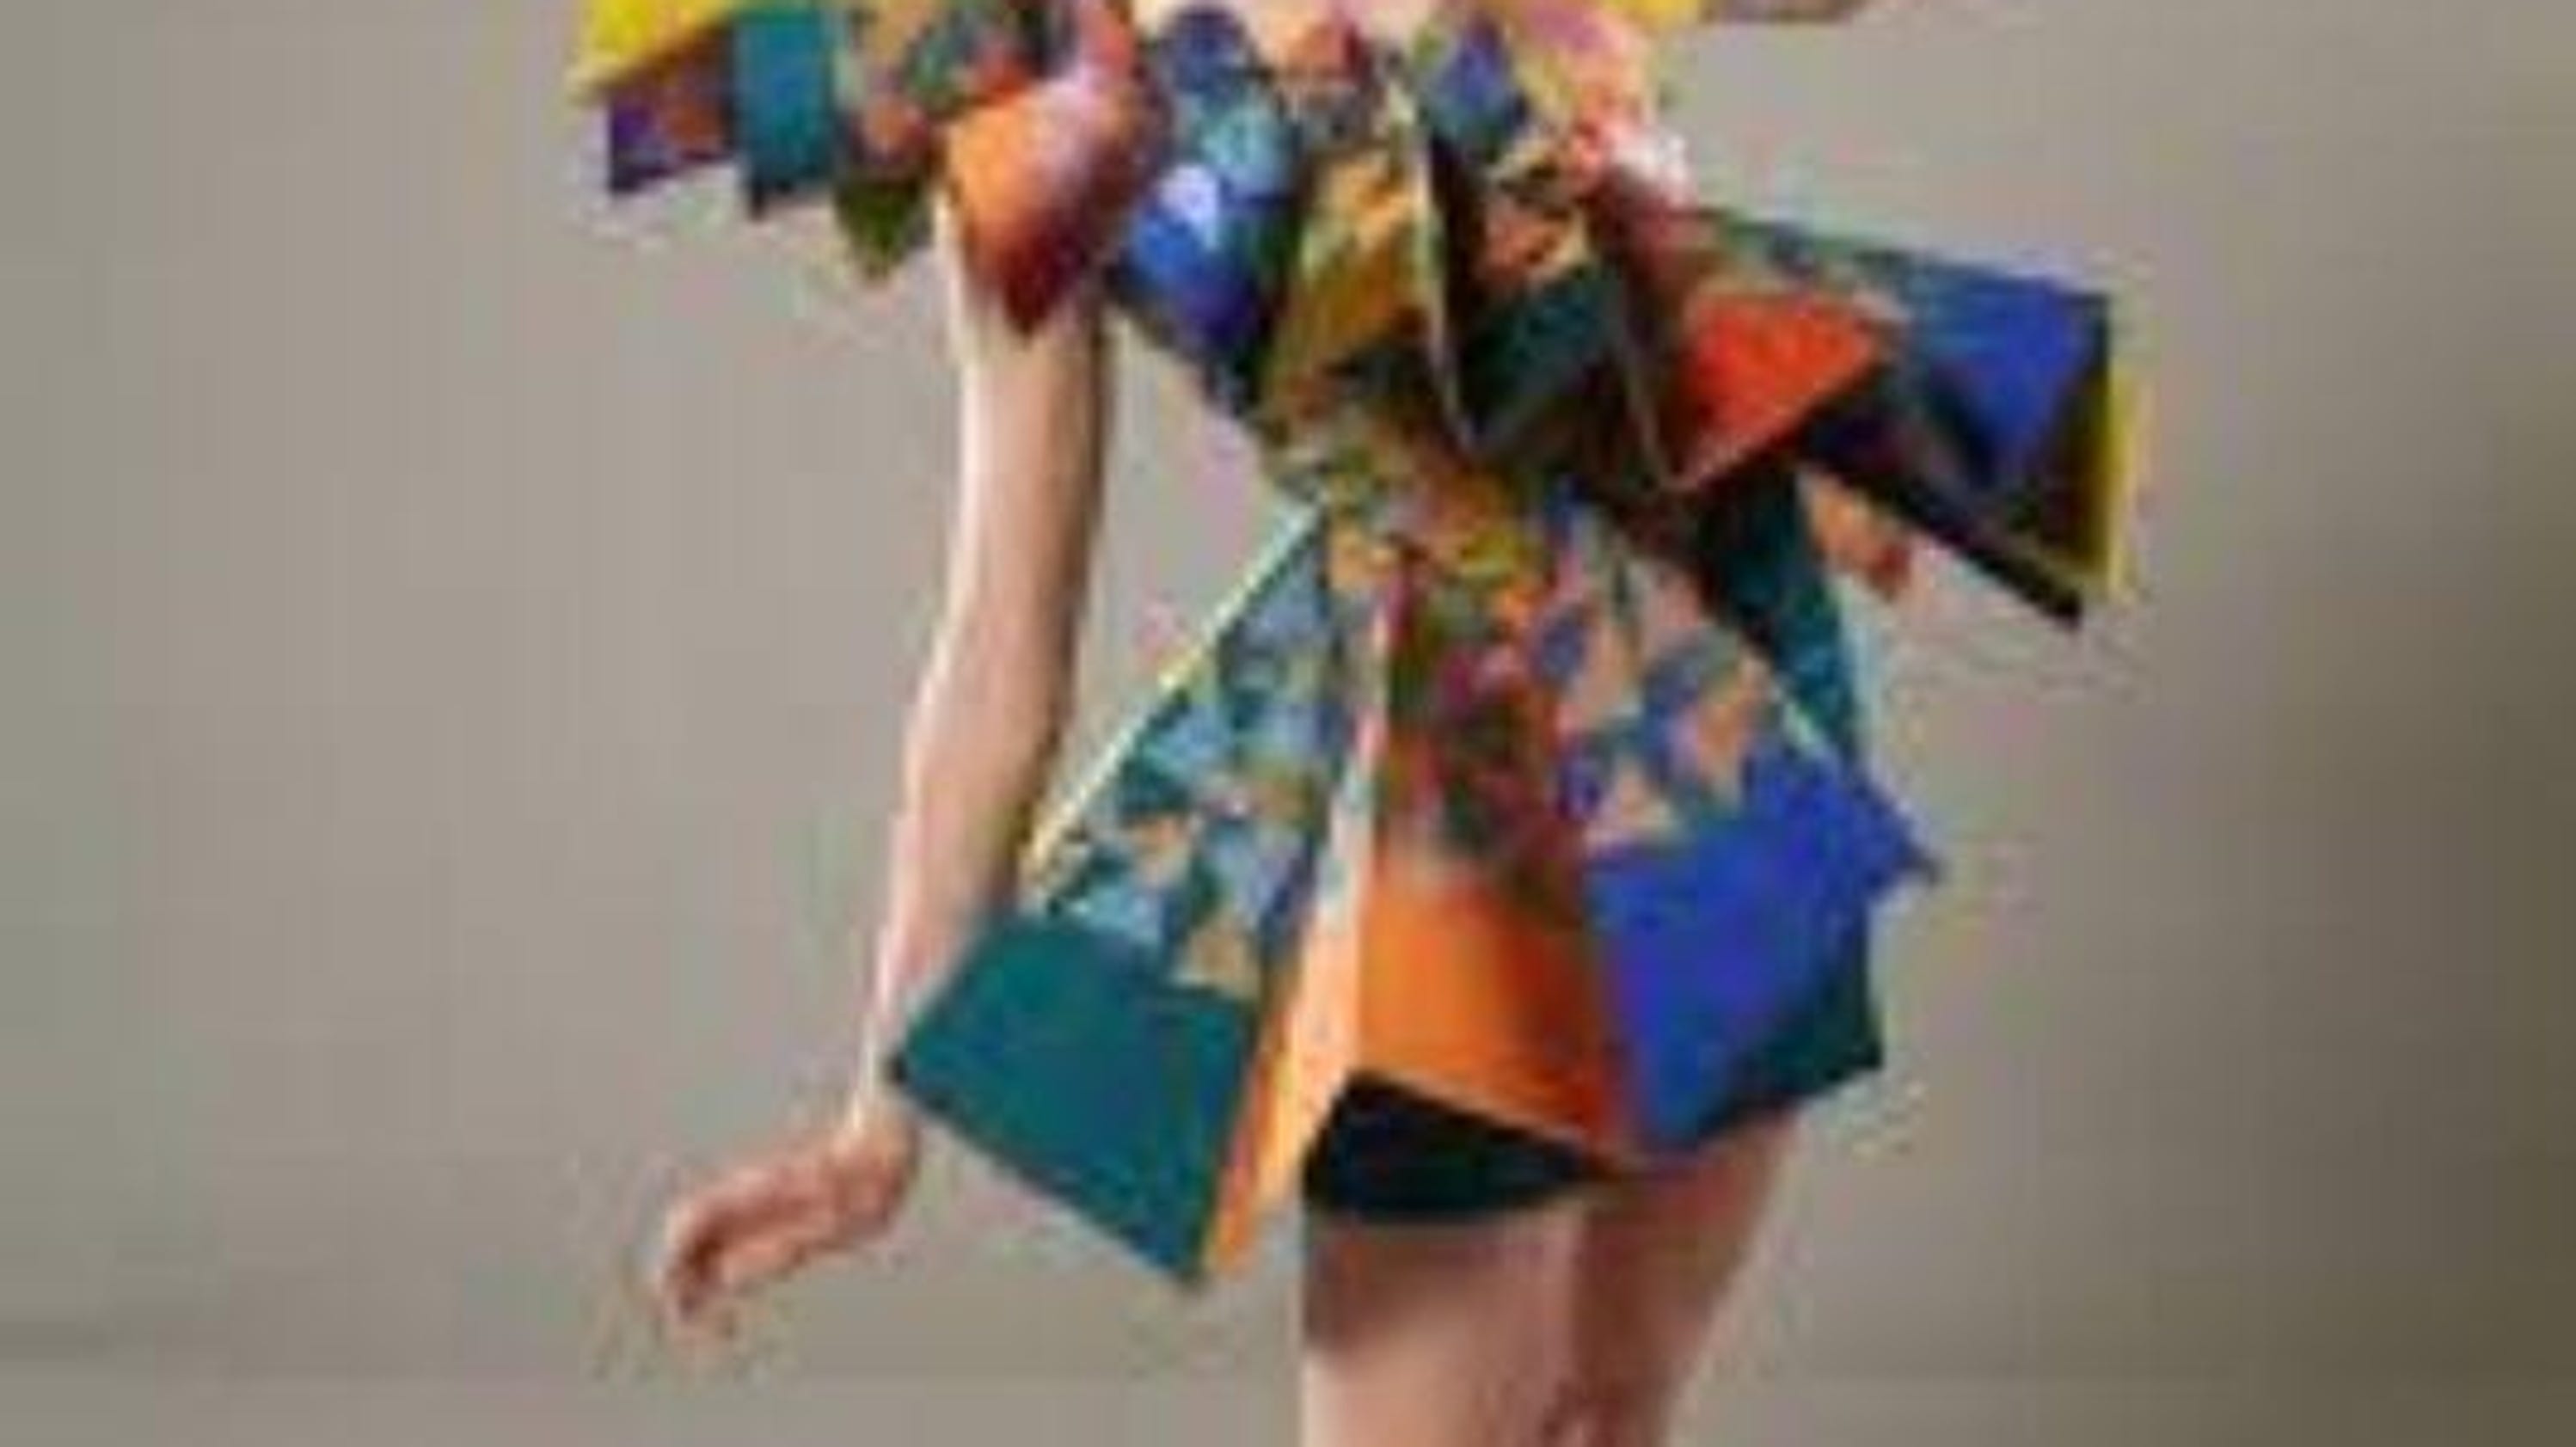 Winners for art Wearable Art competition announced